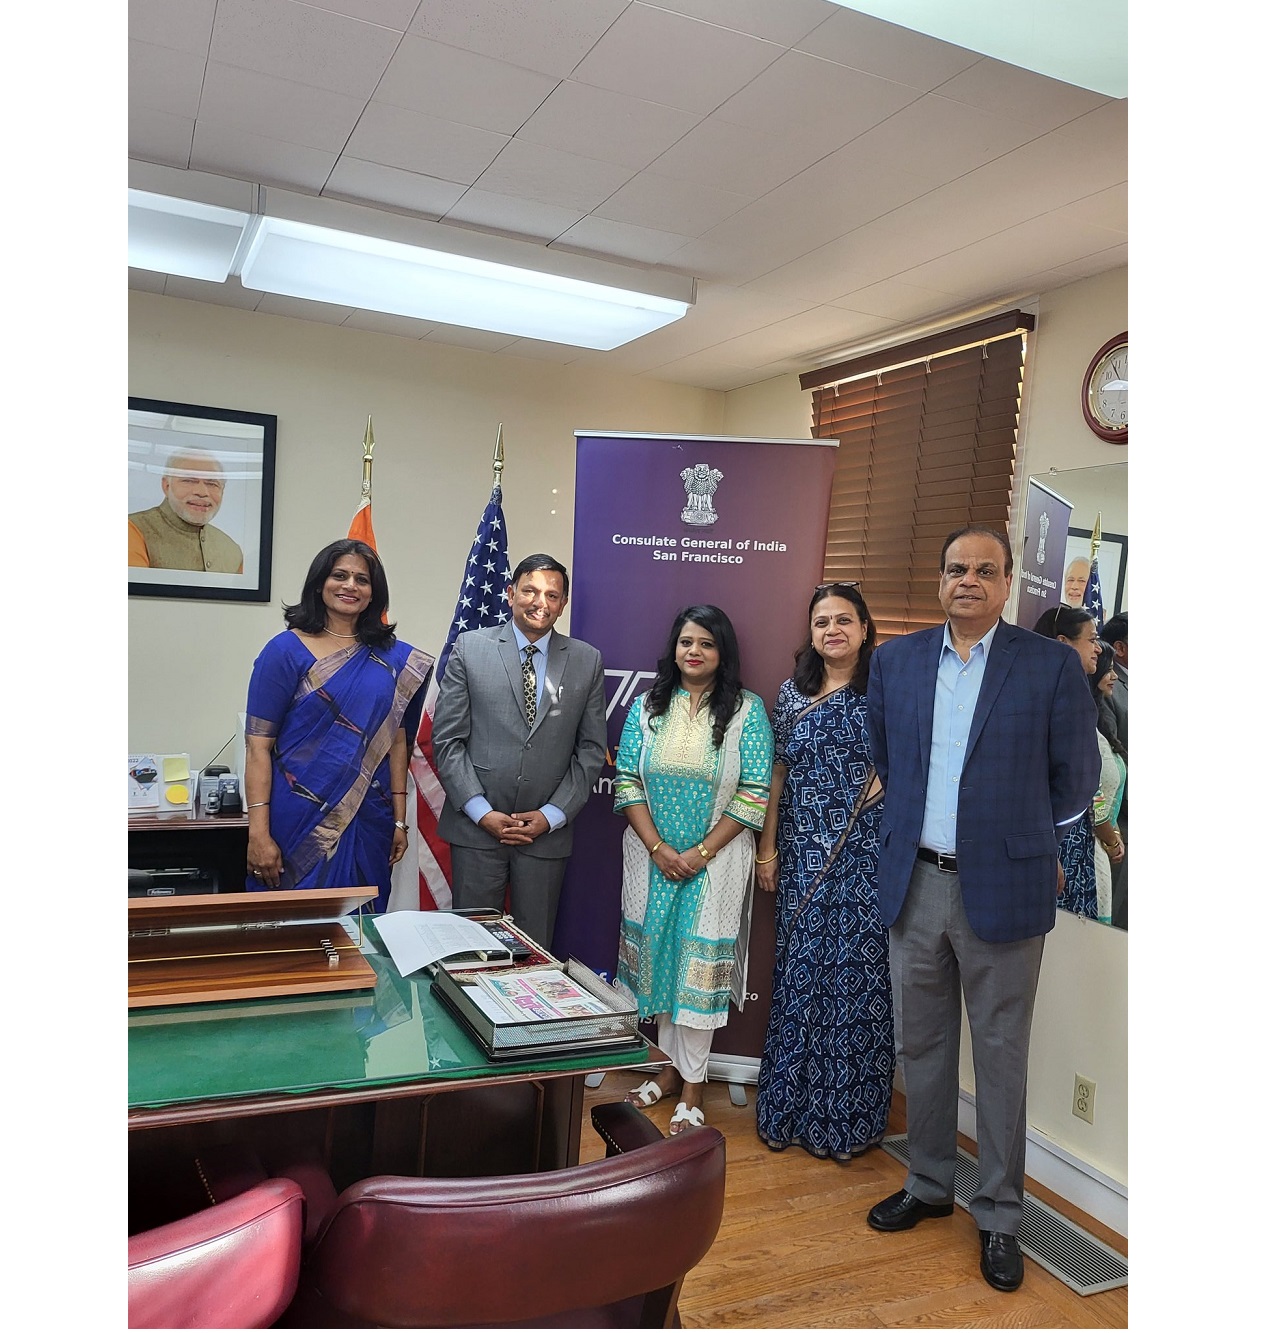 Consulate General of India, San Francisco, California Events/Photo Gallery